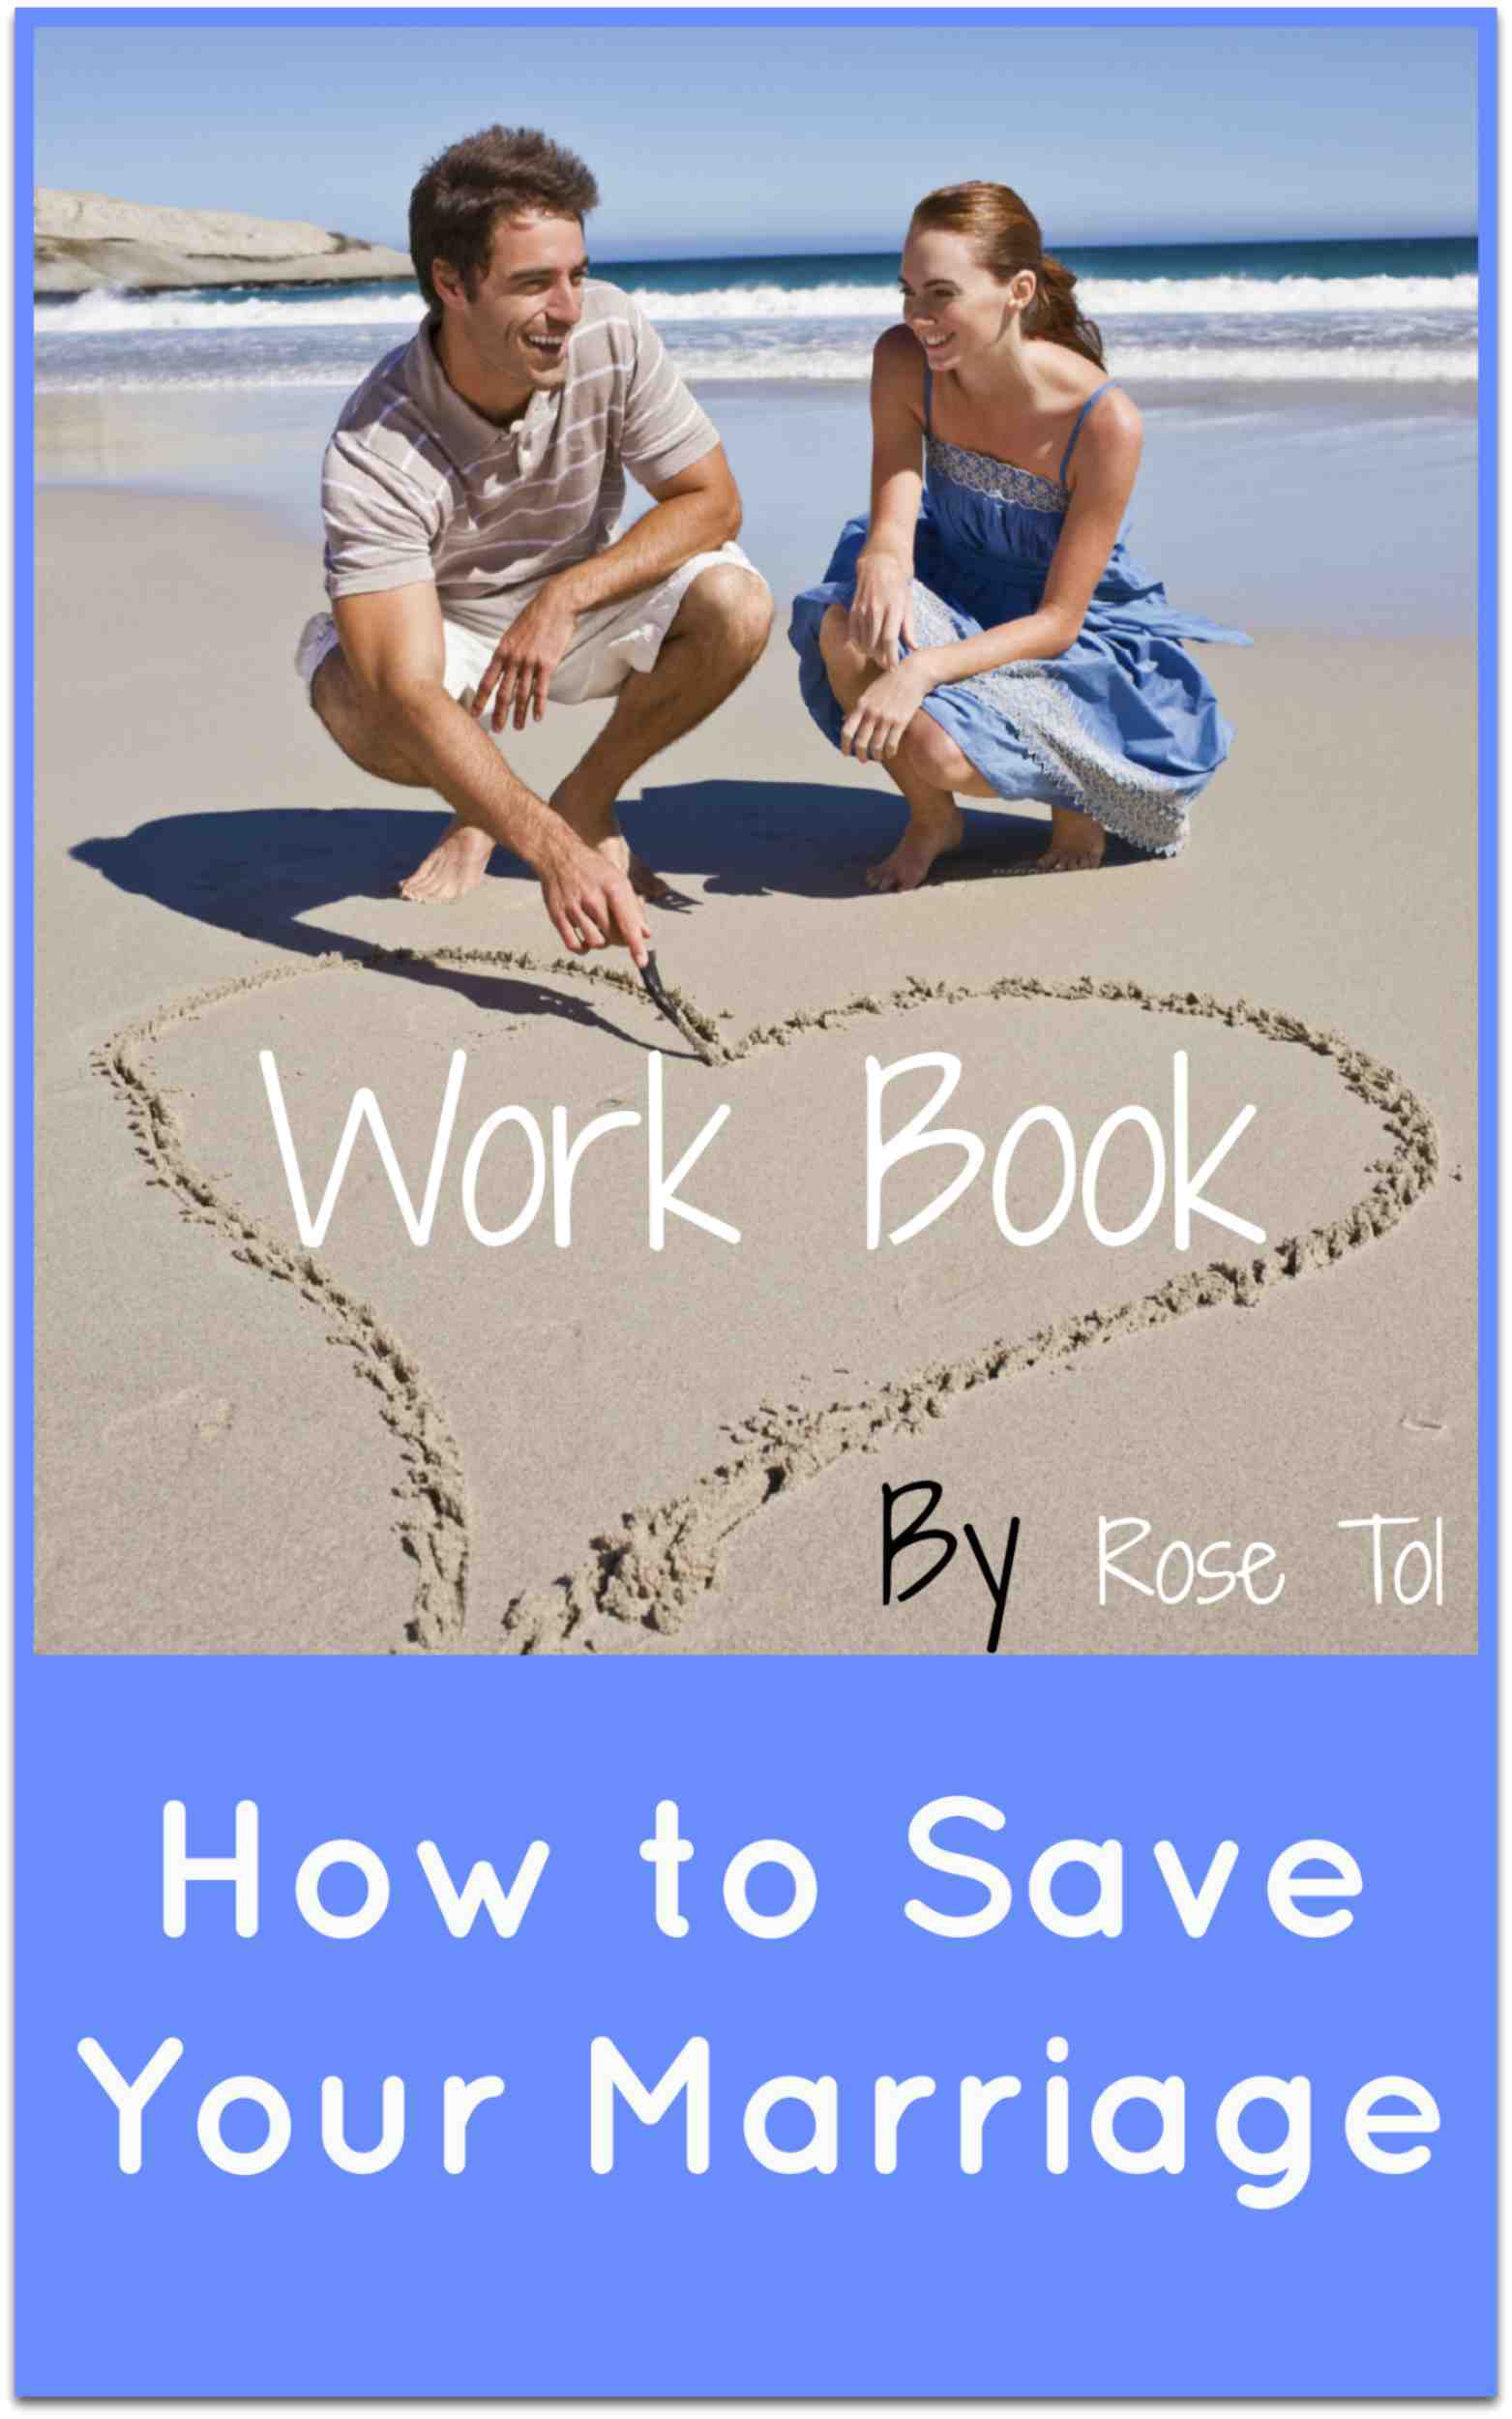 How to save a marriage